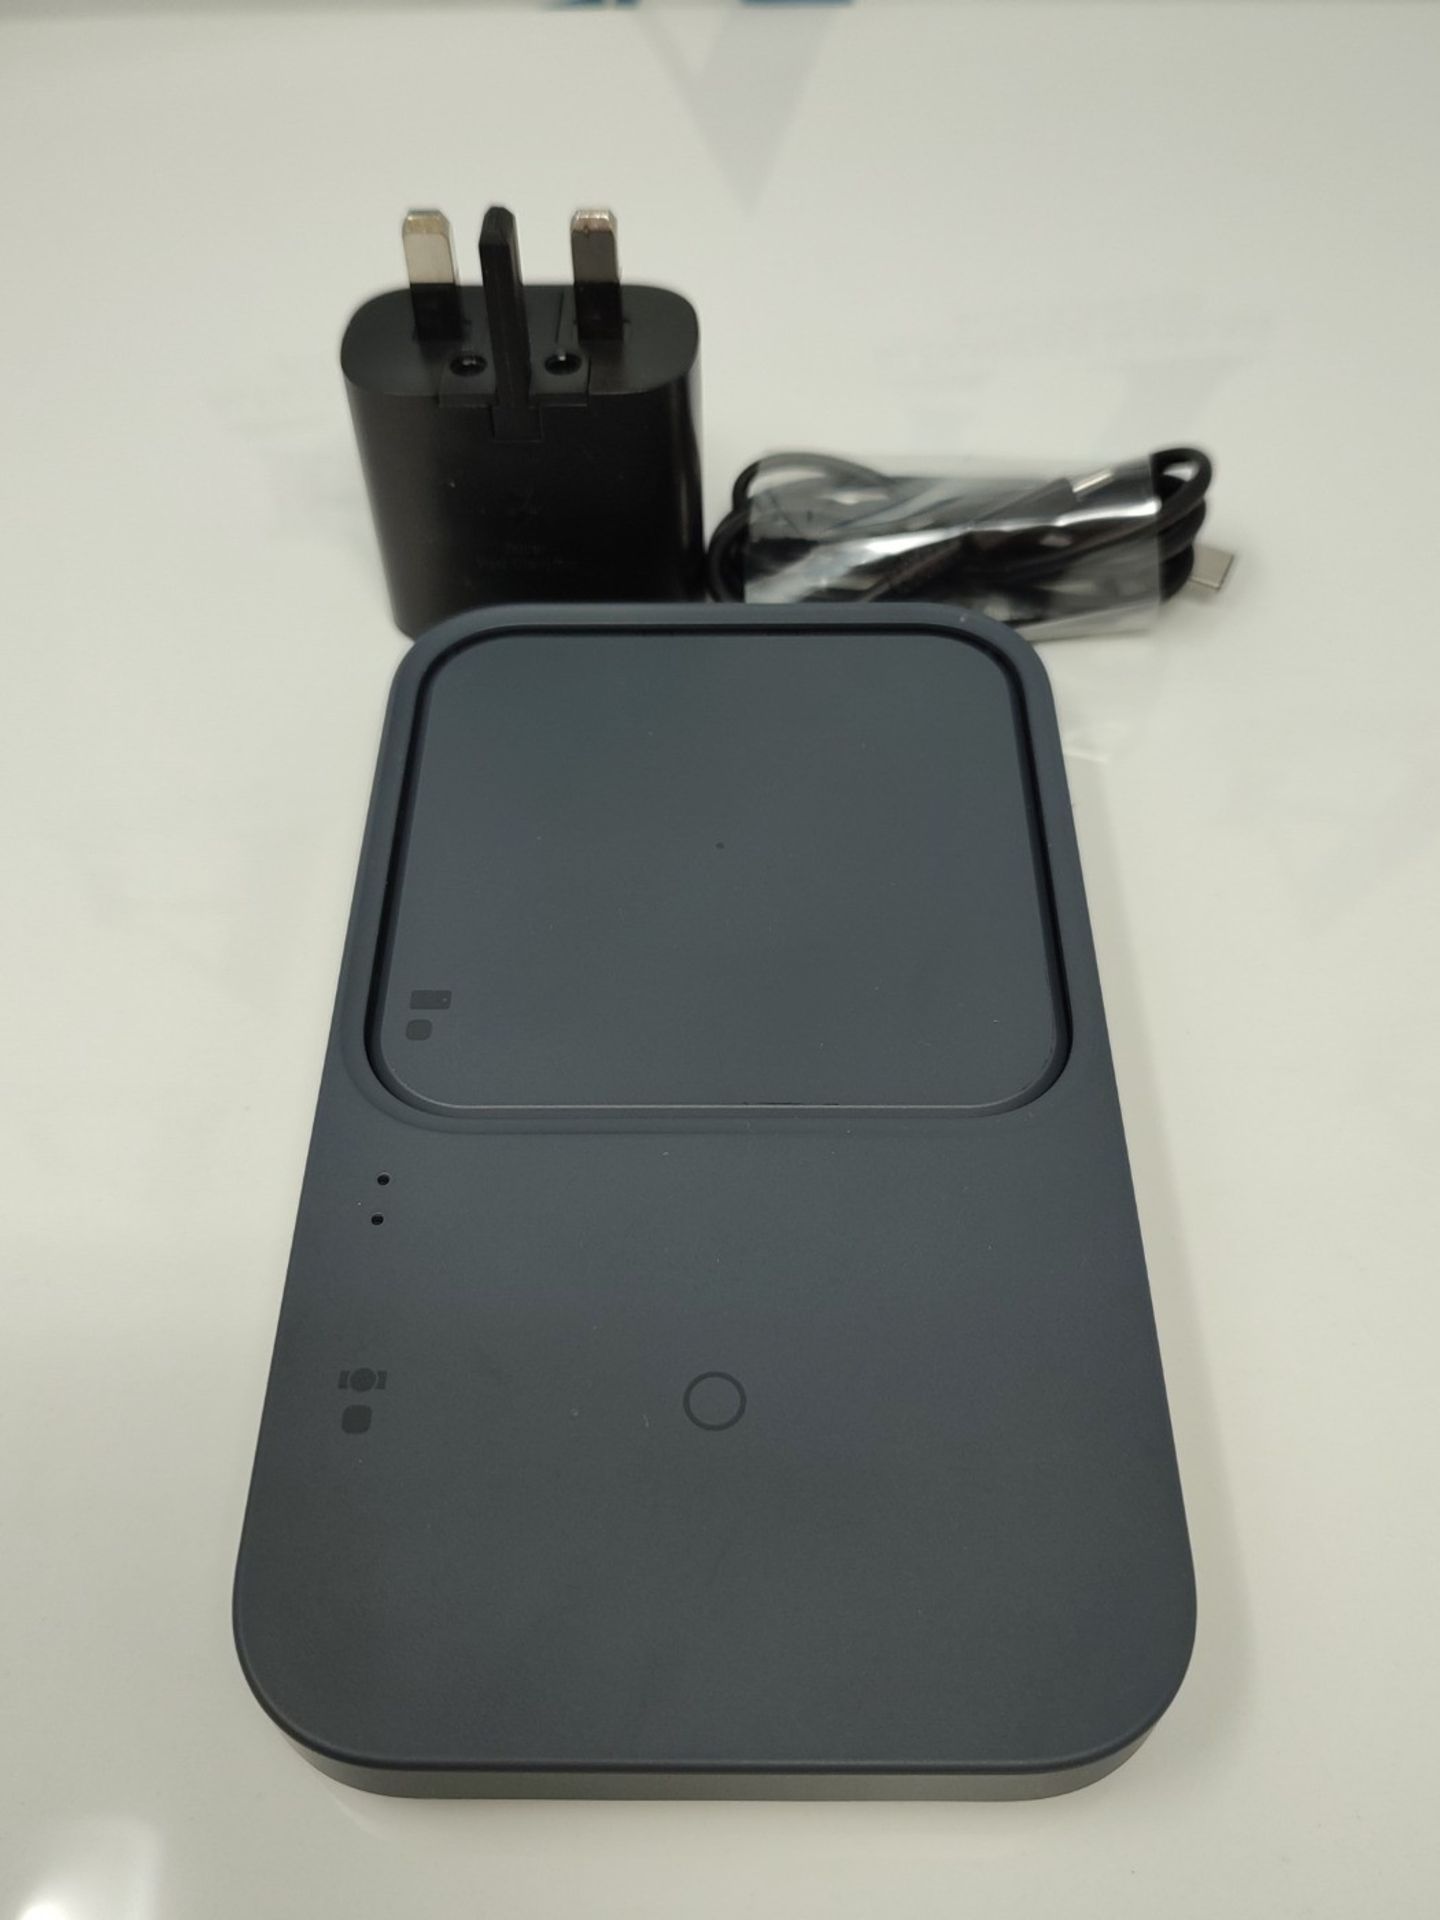 Samsung Galaxy Official Wireless Duo Charging Pad, Black - Image 3 of 3